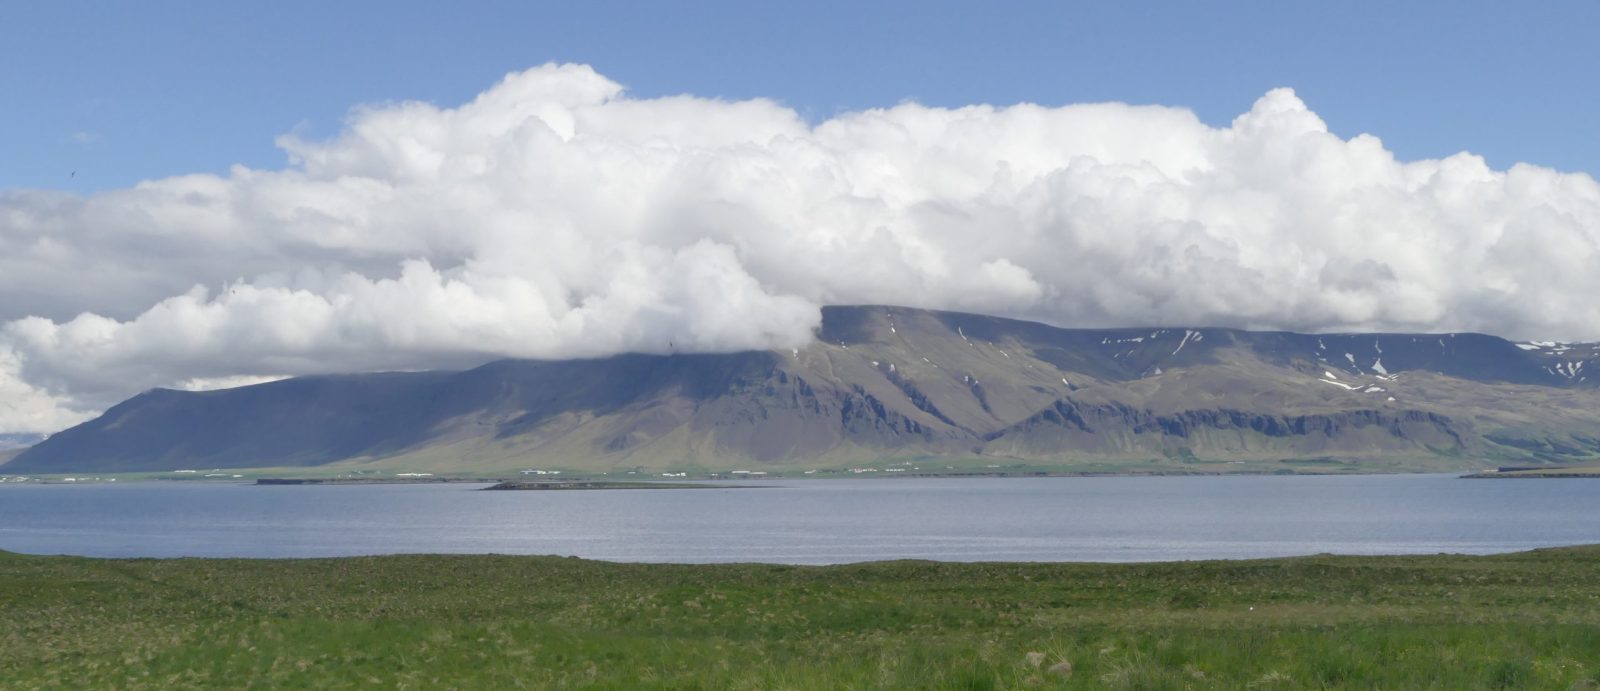 The view from Viðey north over the bay to the Esja mountain ridge, with a big white cloud low over it.